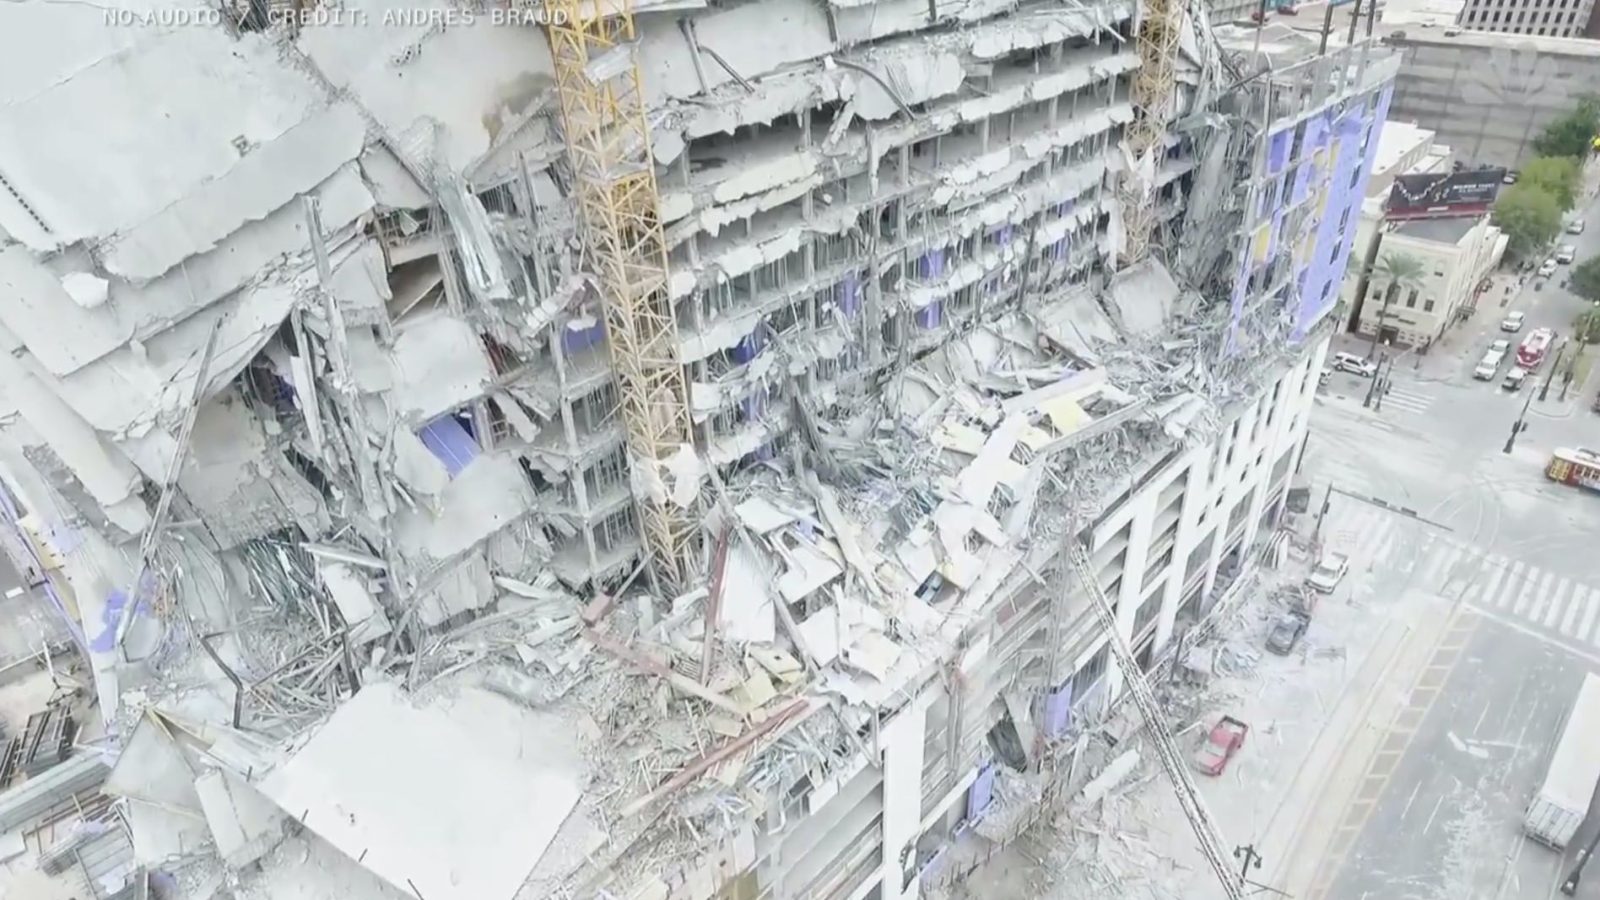 Drone video shows aftermath collapse Hard Rock Hotel in New Orleans